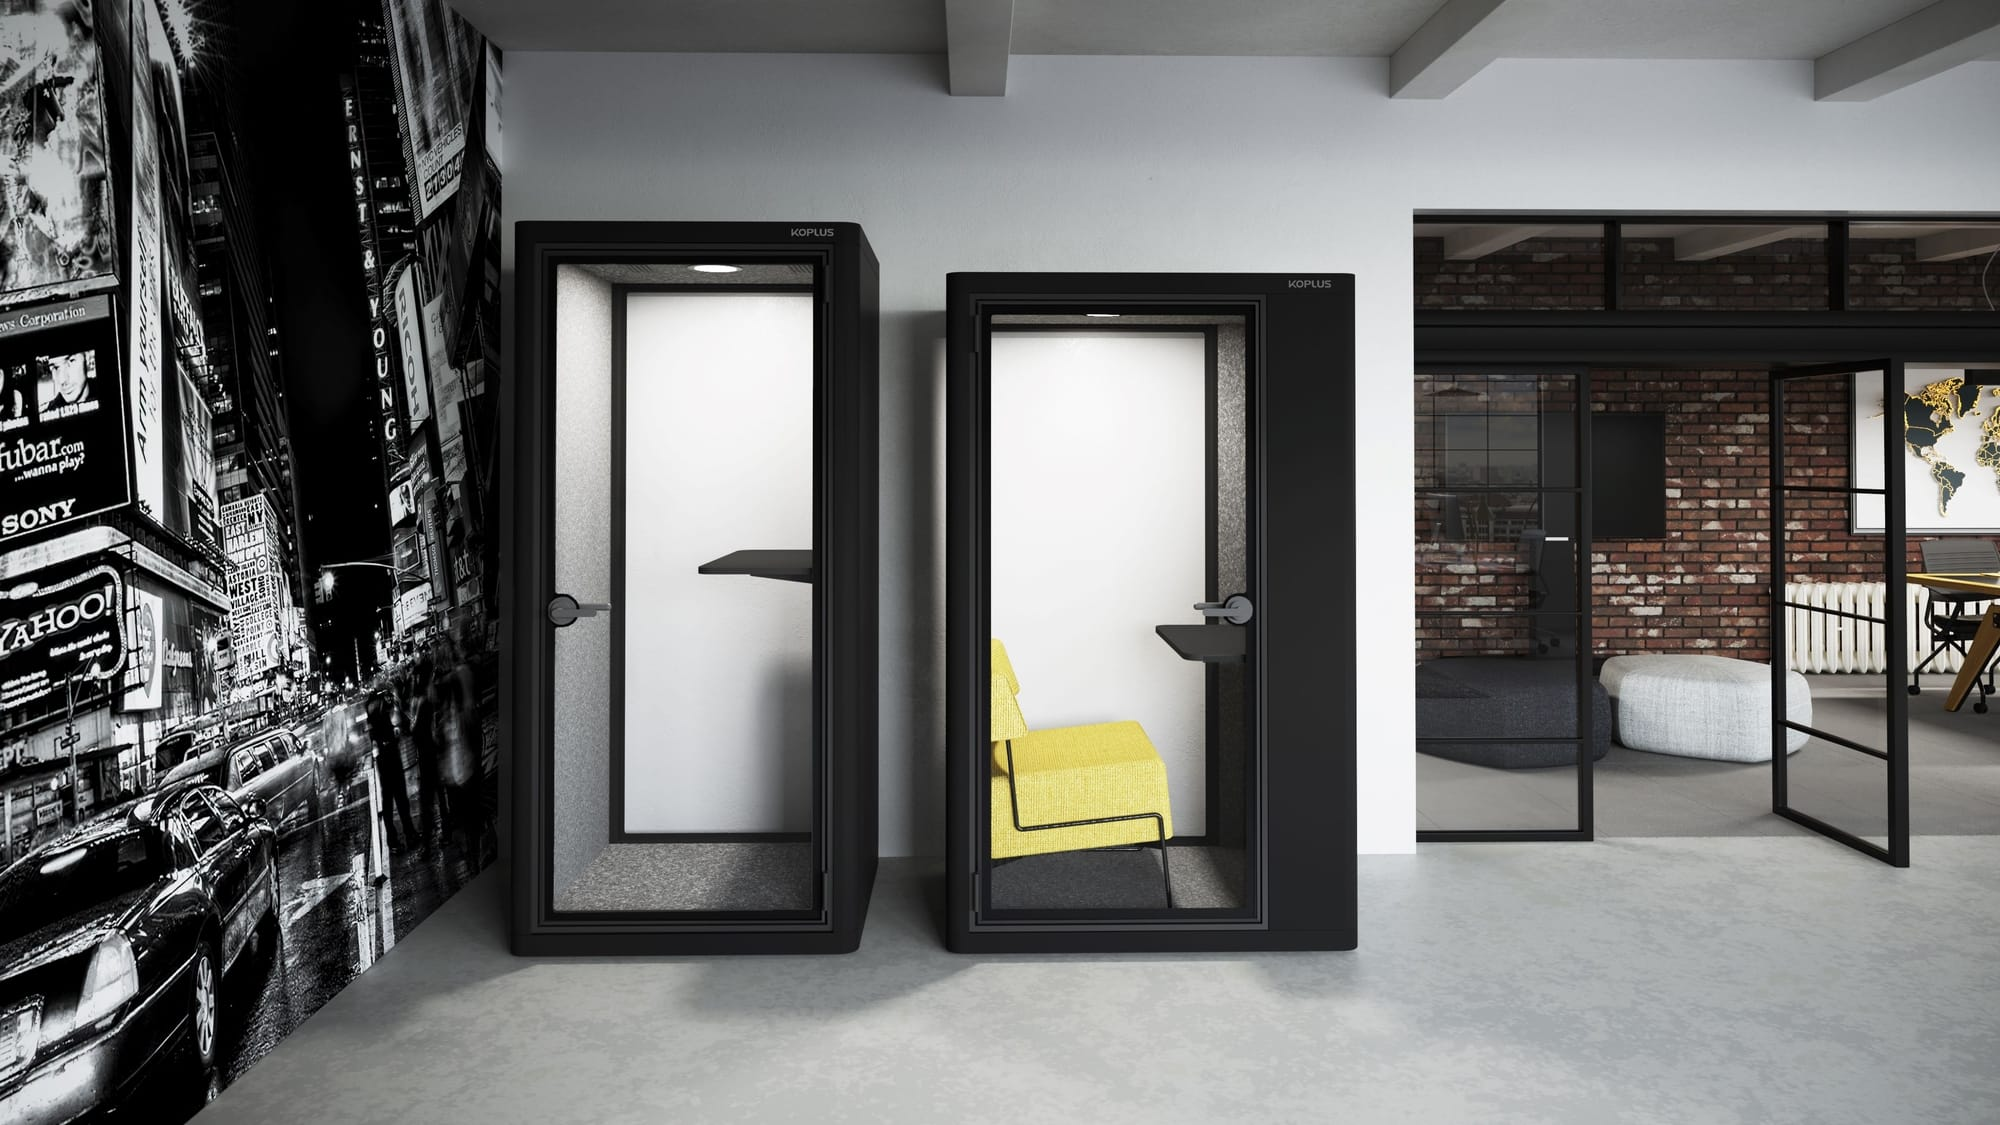 Using Office Pods to Improve Their Employees' Work-Life Balance